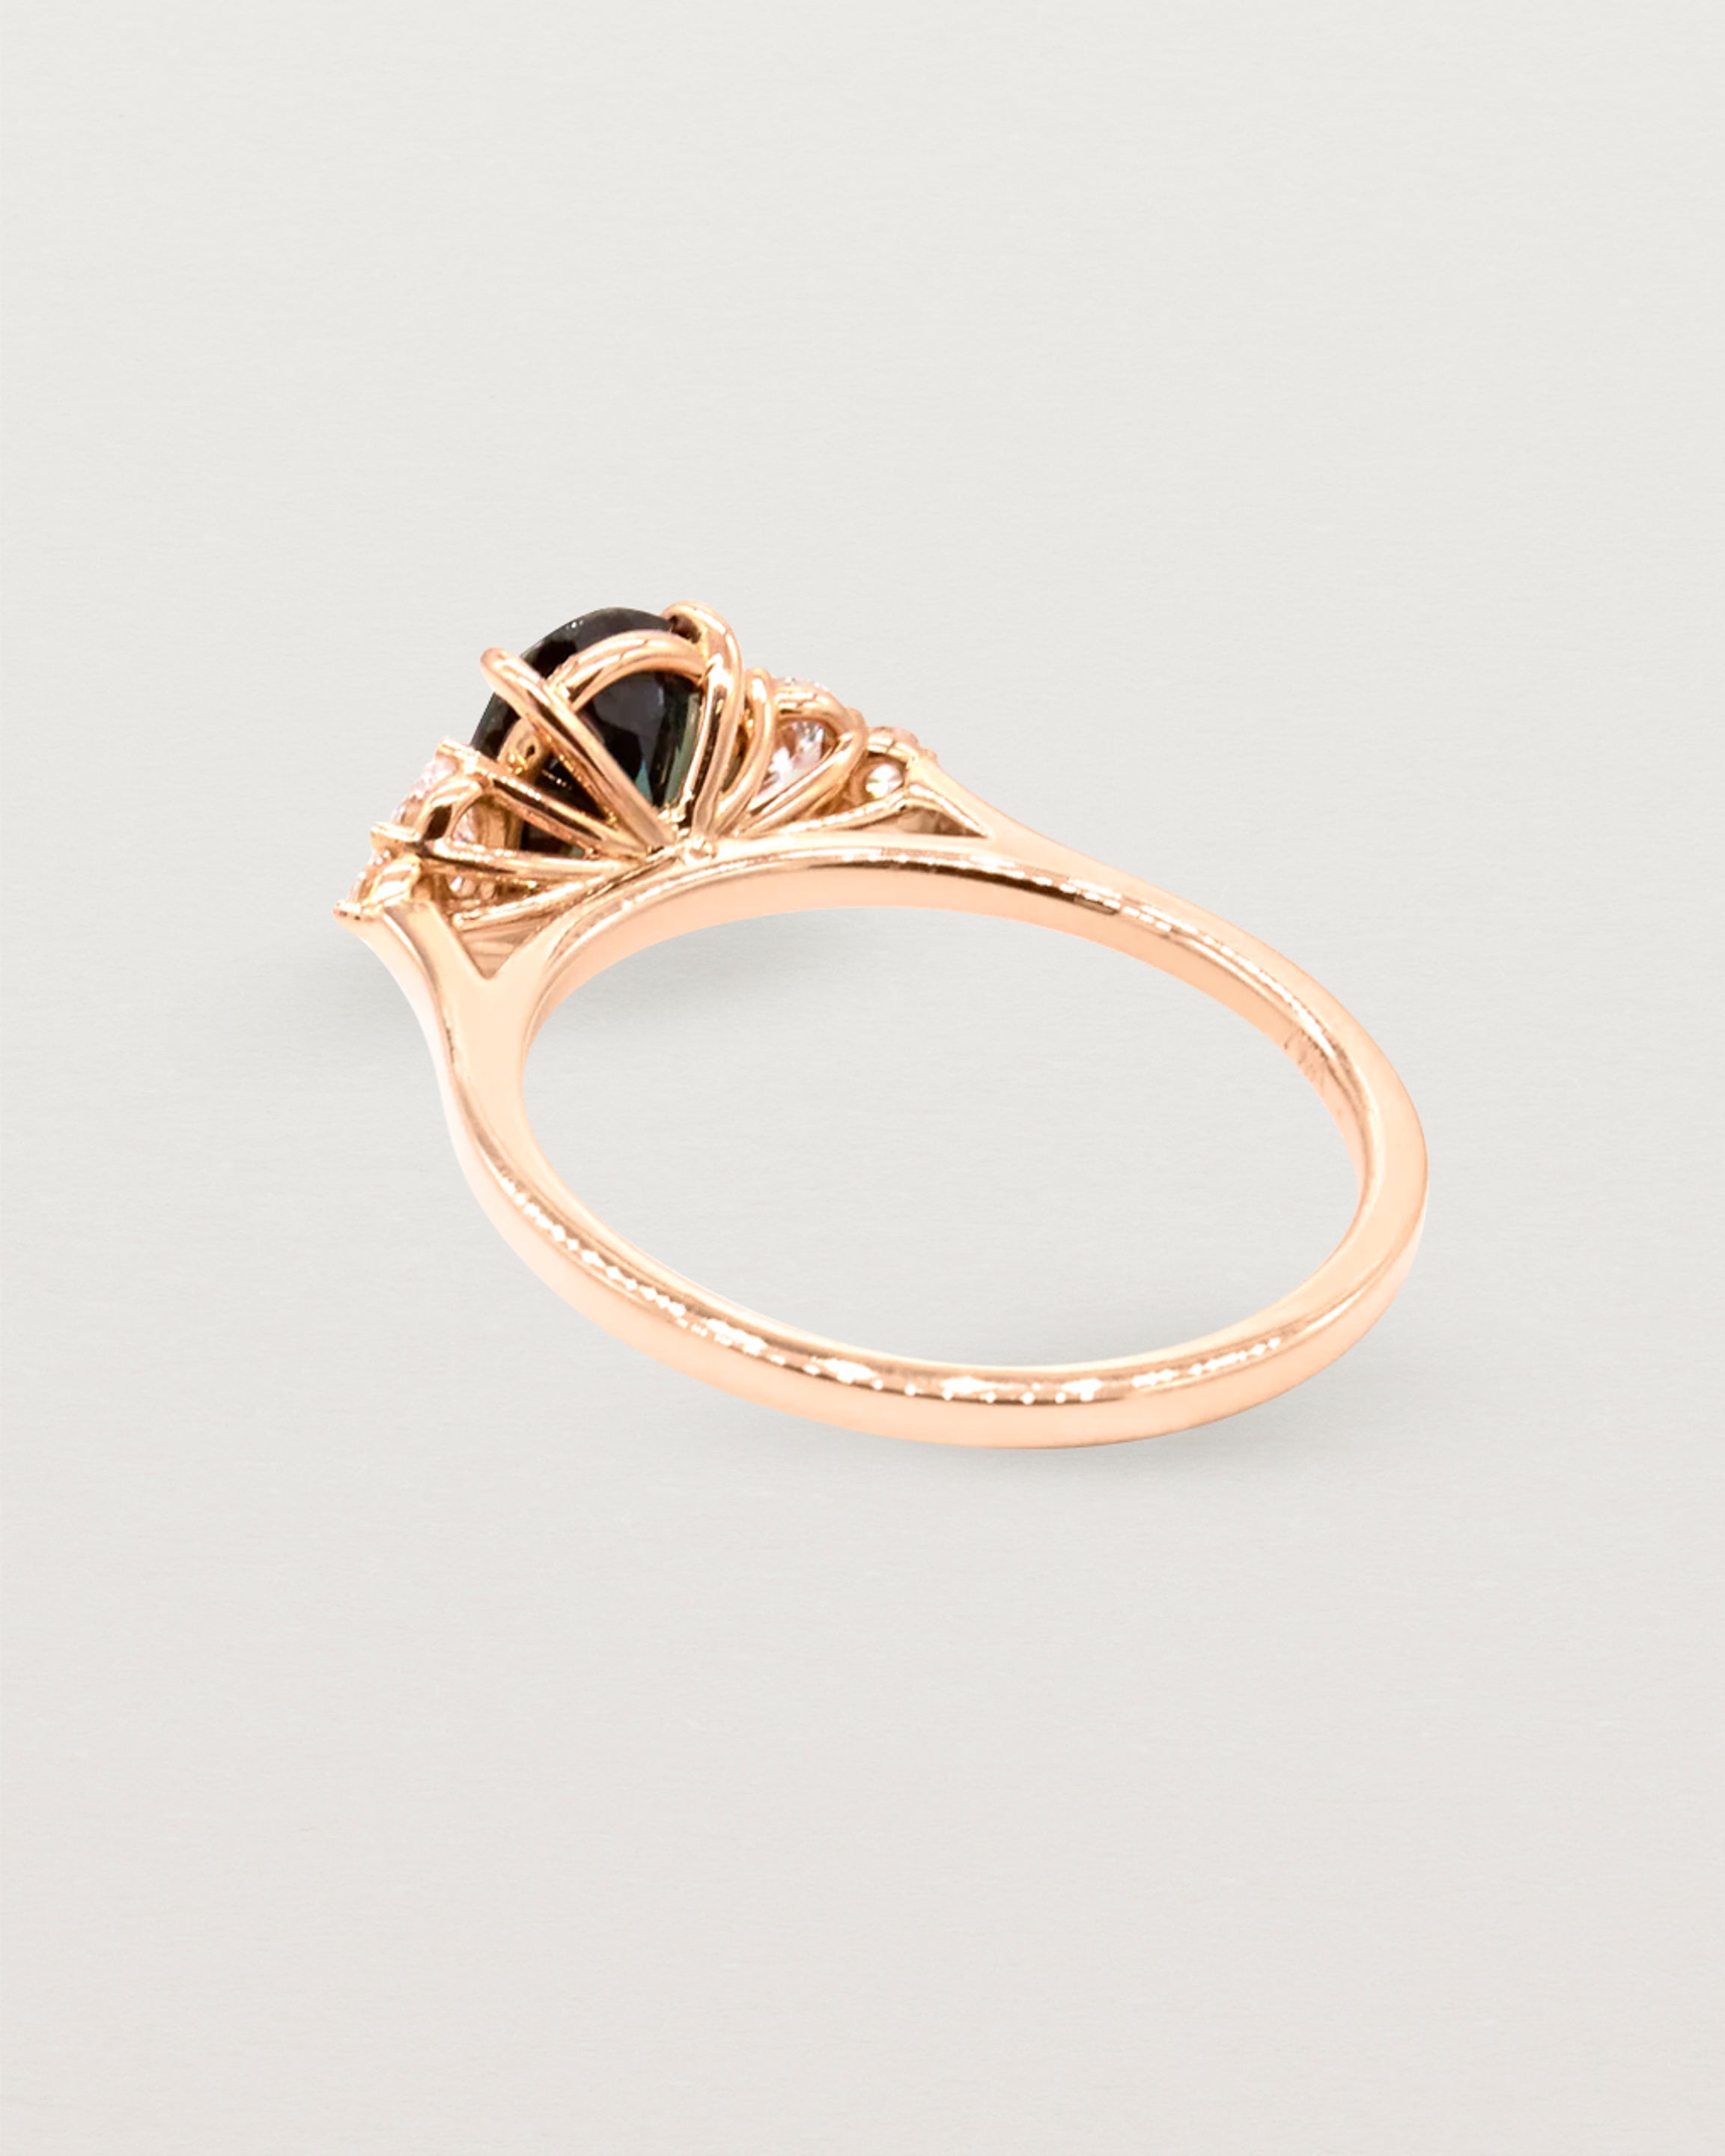 Back view of a cluster ring in rose gold